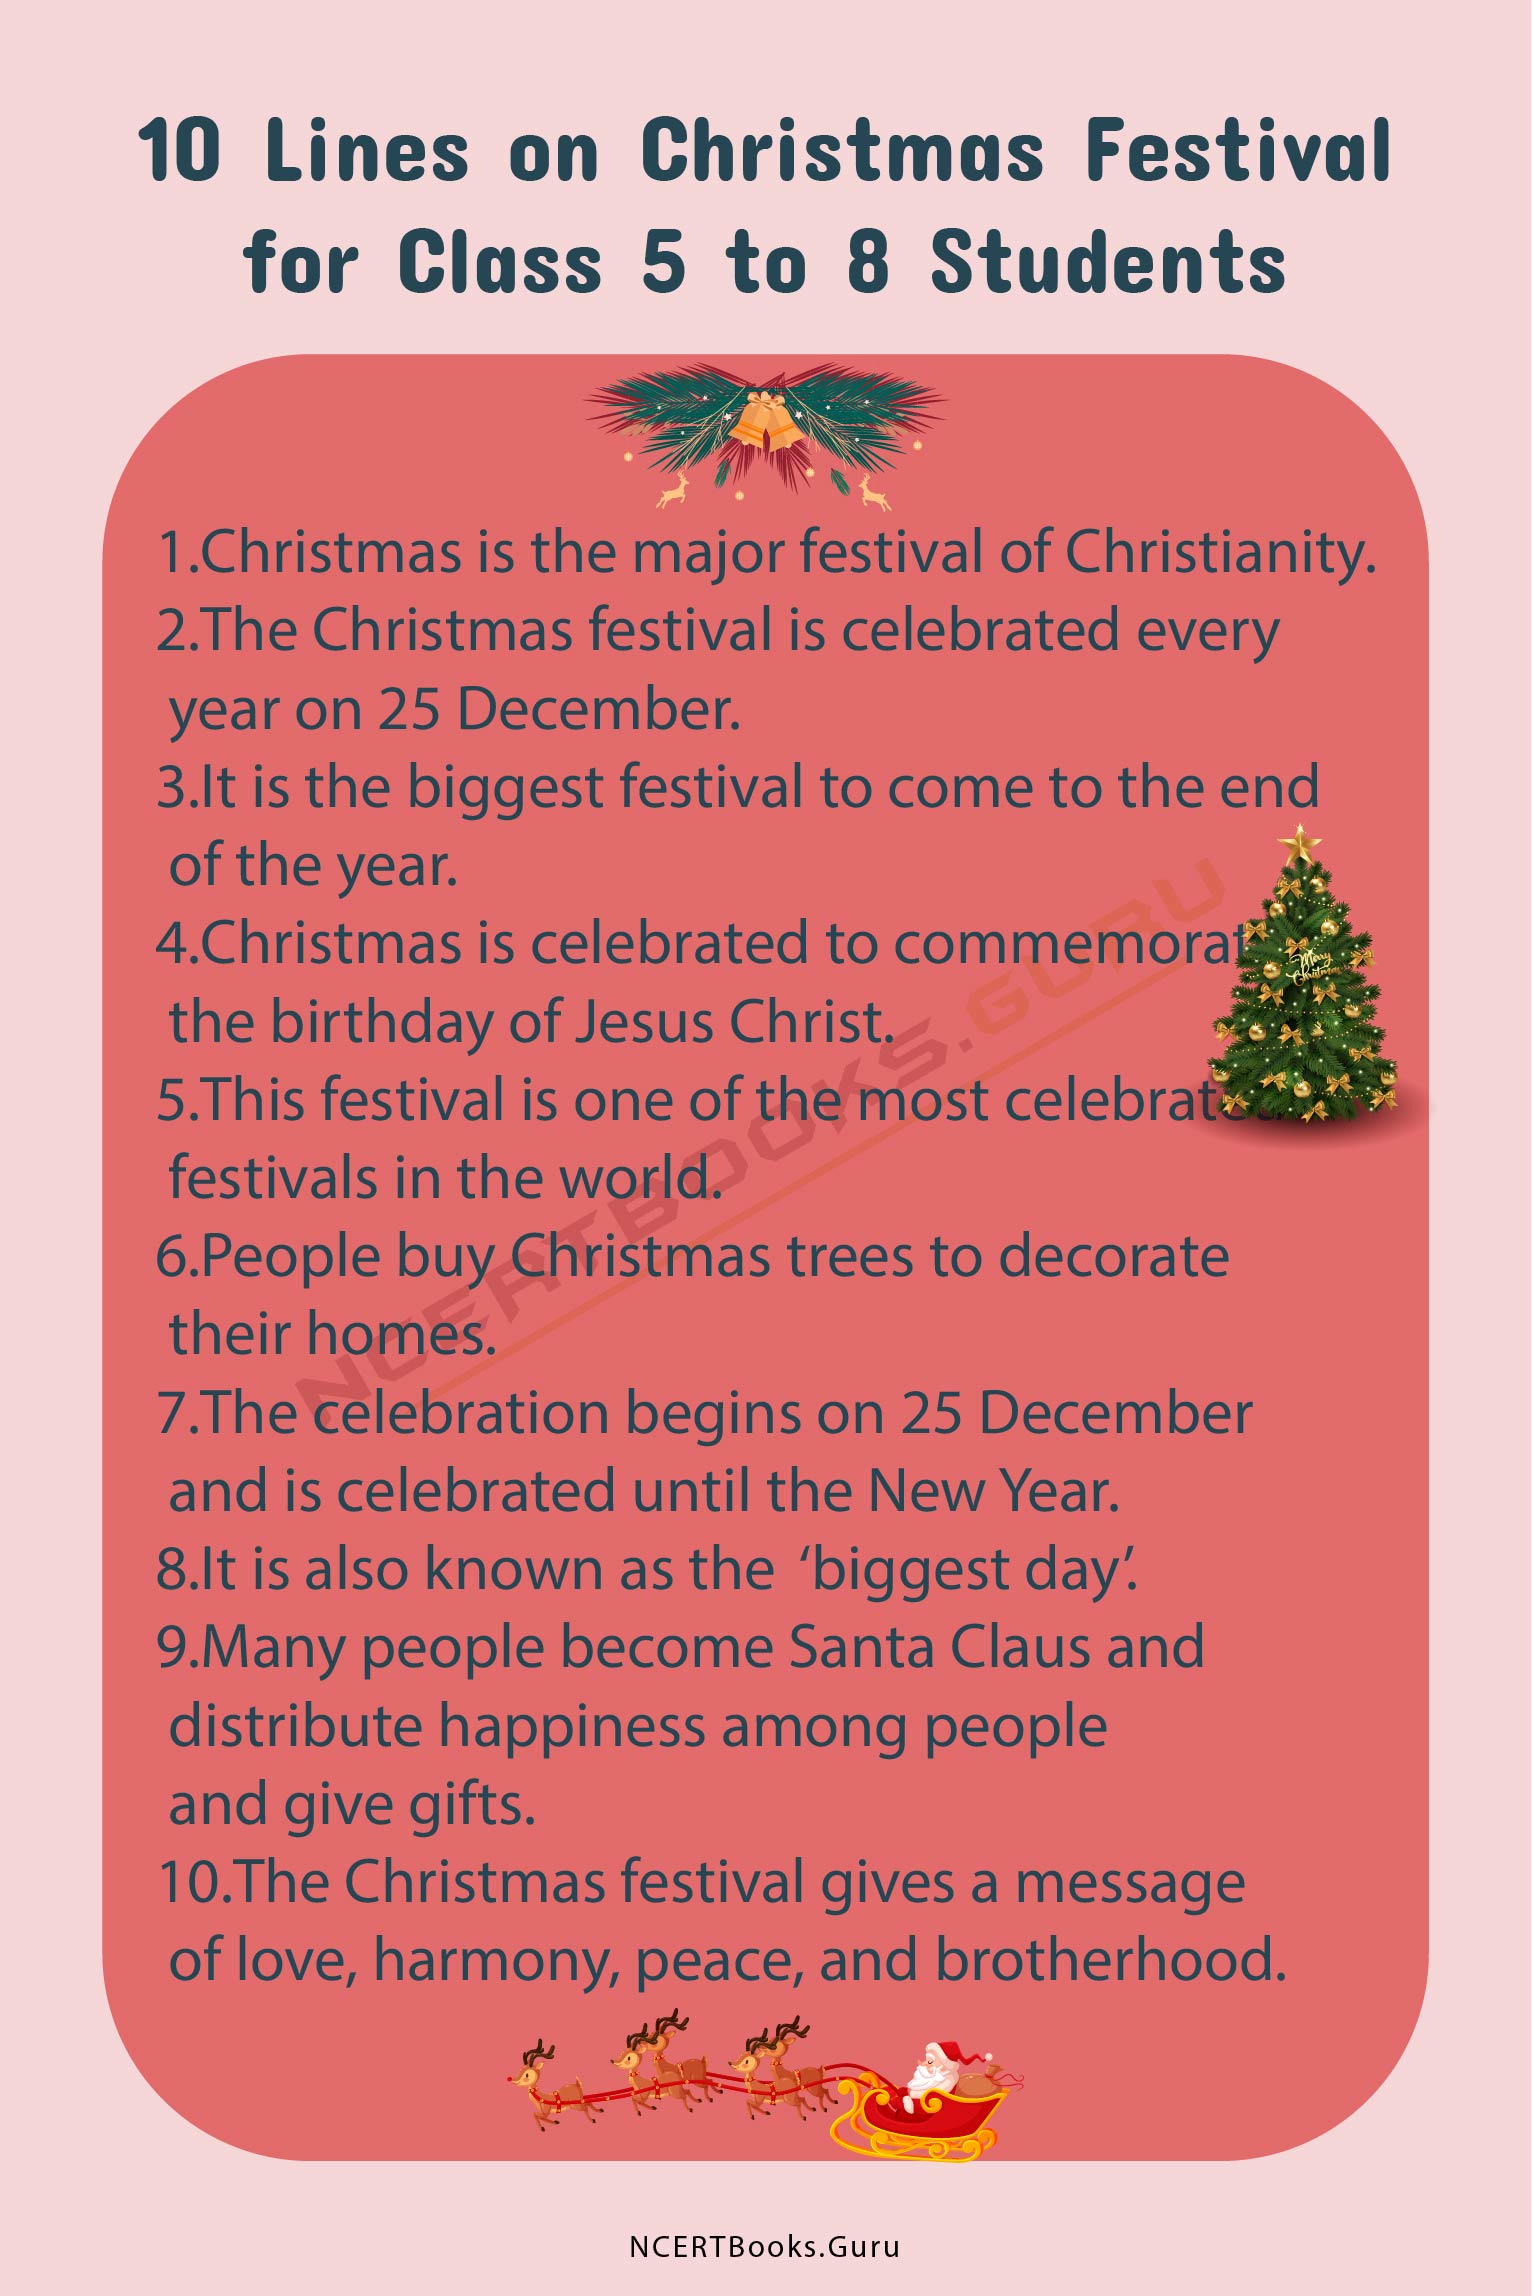 10 Lines on Christmas Festival 2